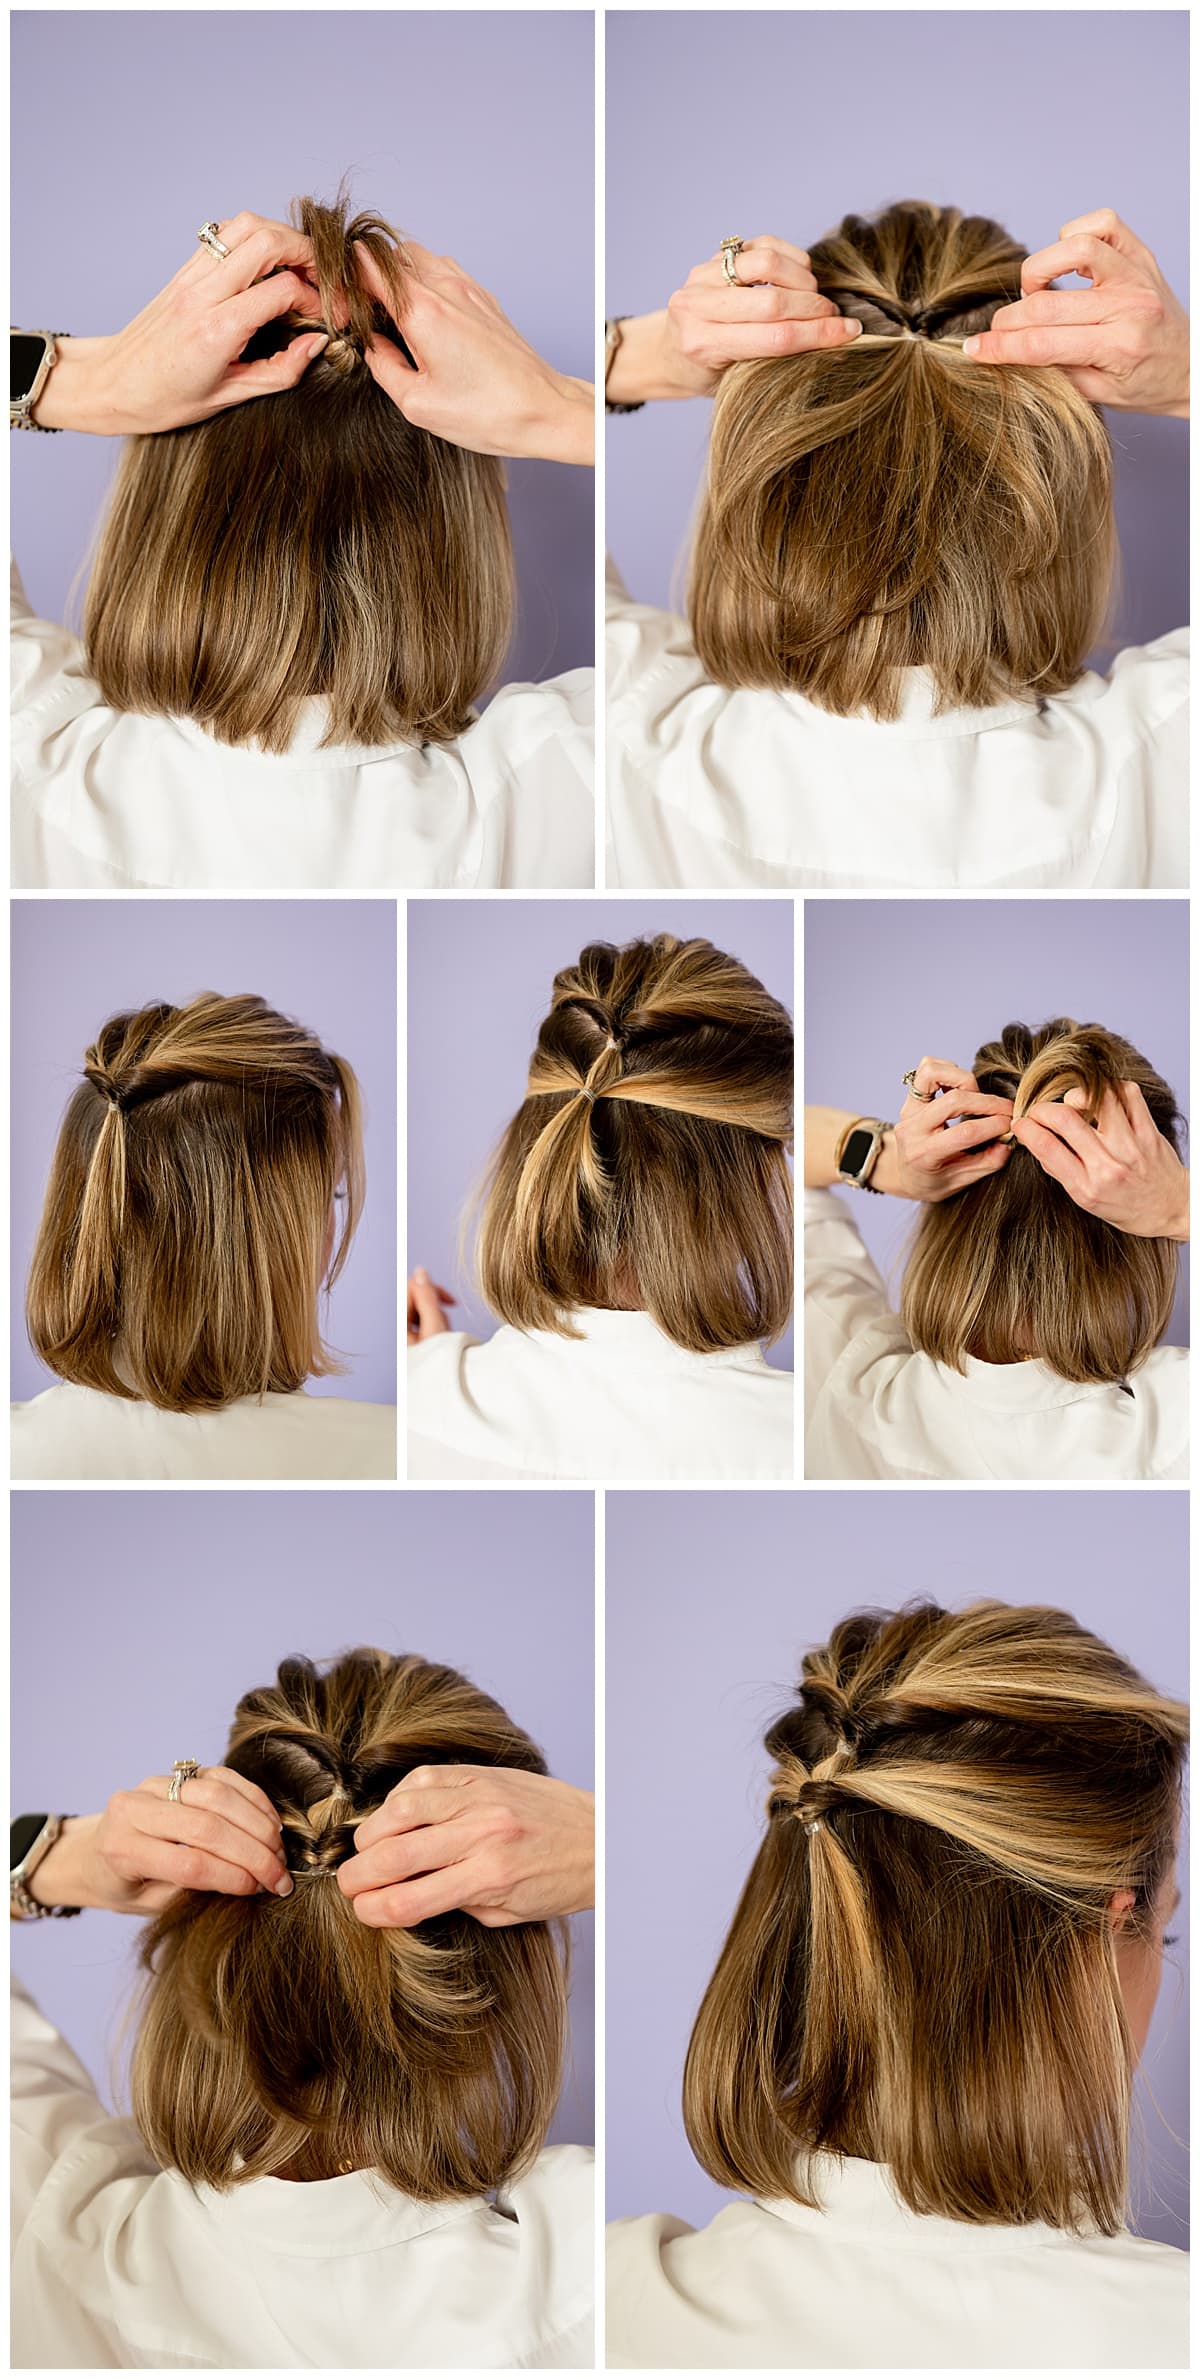 Step-by-step picture tutorial on how to do a double half-up hairstyle with short hair.